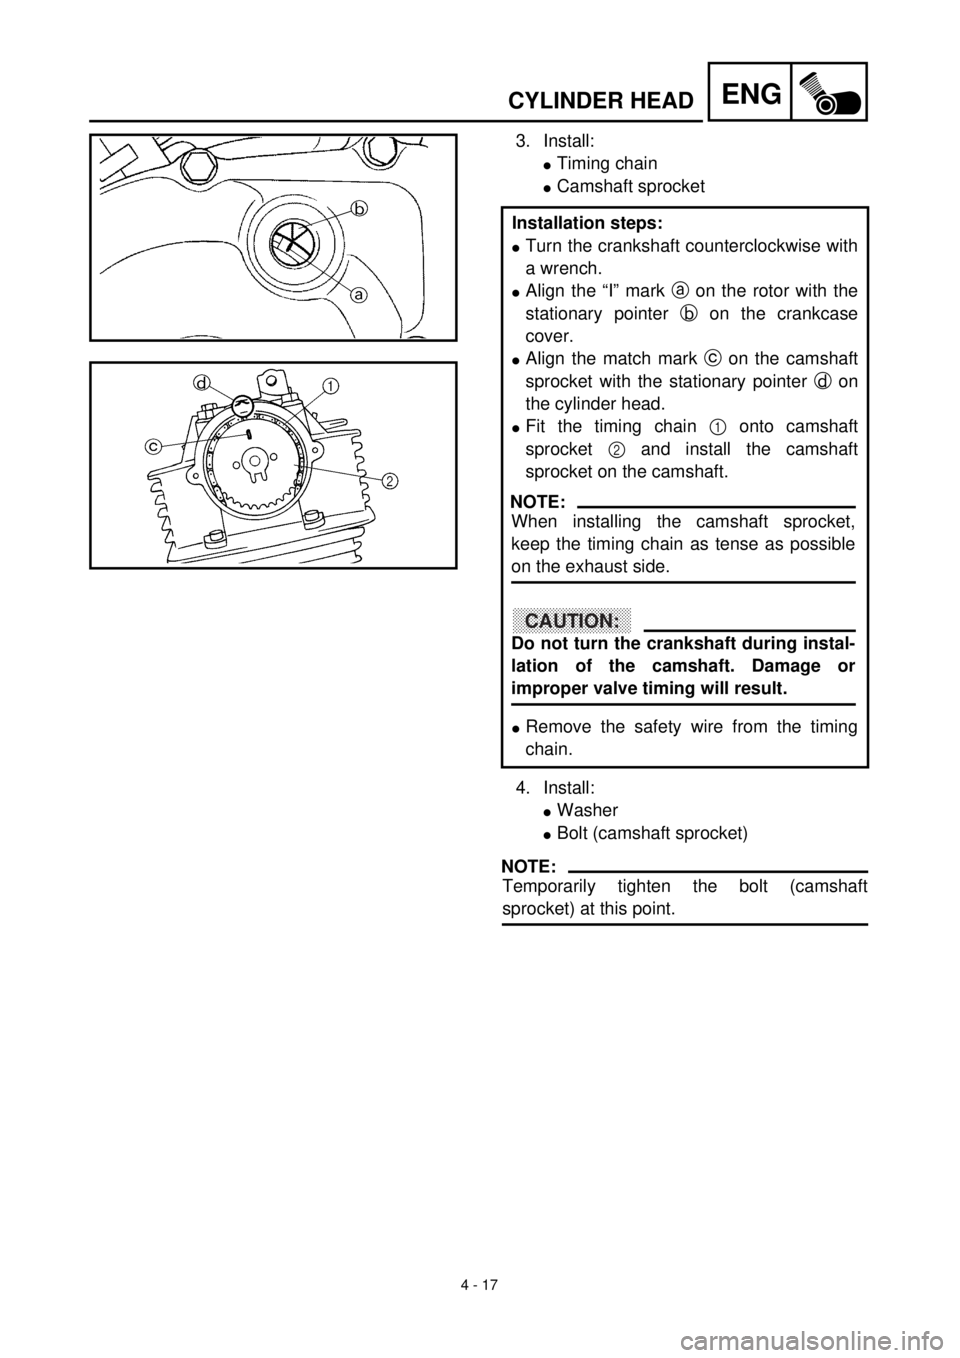 YAMAHA TTR125 2000  Notices Demploi (in French) 4 - 17
ENGCYLINDER HEAD
3. Install:
lTiming chain 
lCamshaft sprocket 
4. Install:
lWasher
lBolt (camshaft sprocket) 
NOTE:
Temporarily tighten the bolt (camshaft
sprocket) at this point. Installation